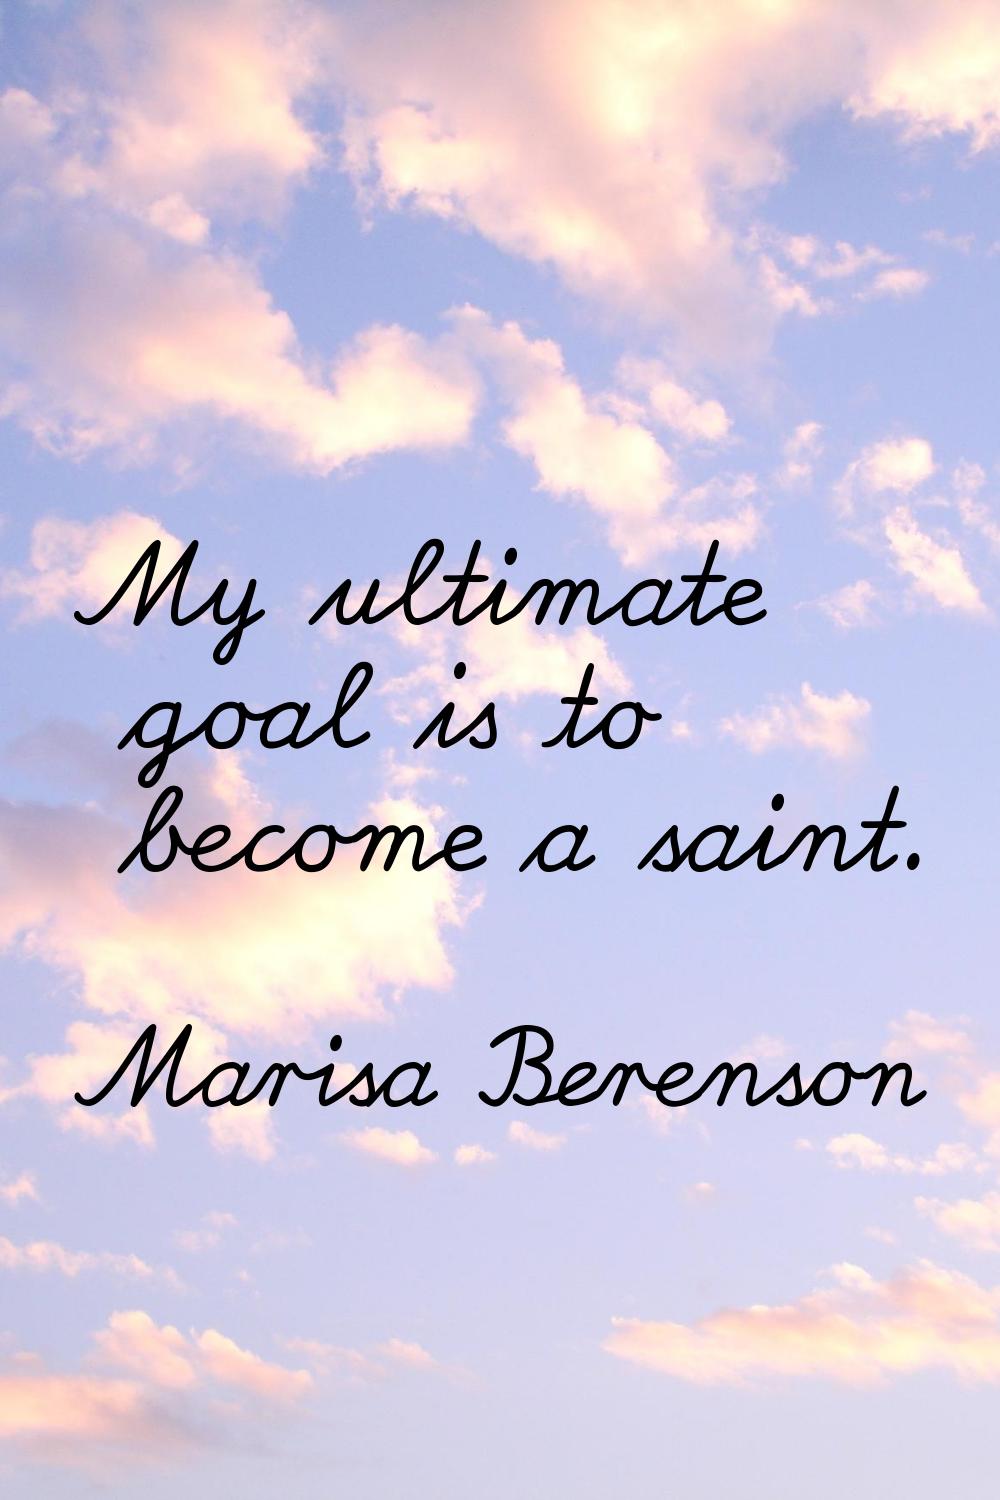 My ultimate goal is to become a saint.